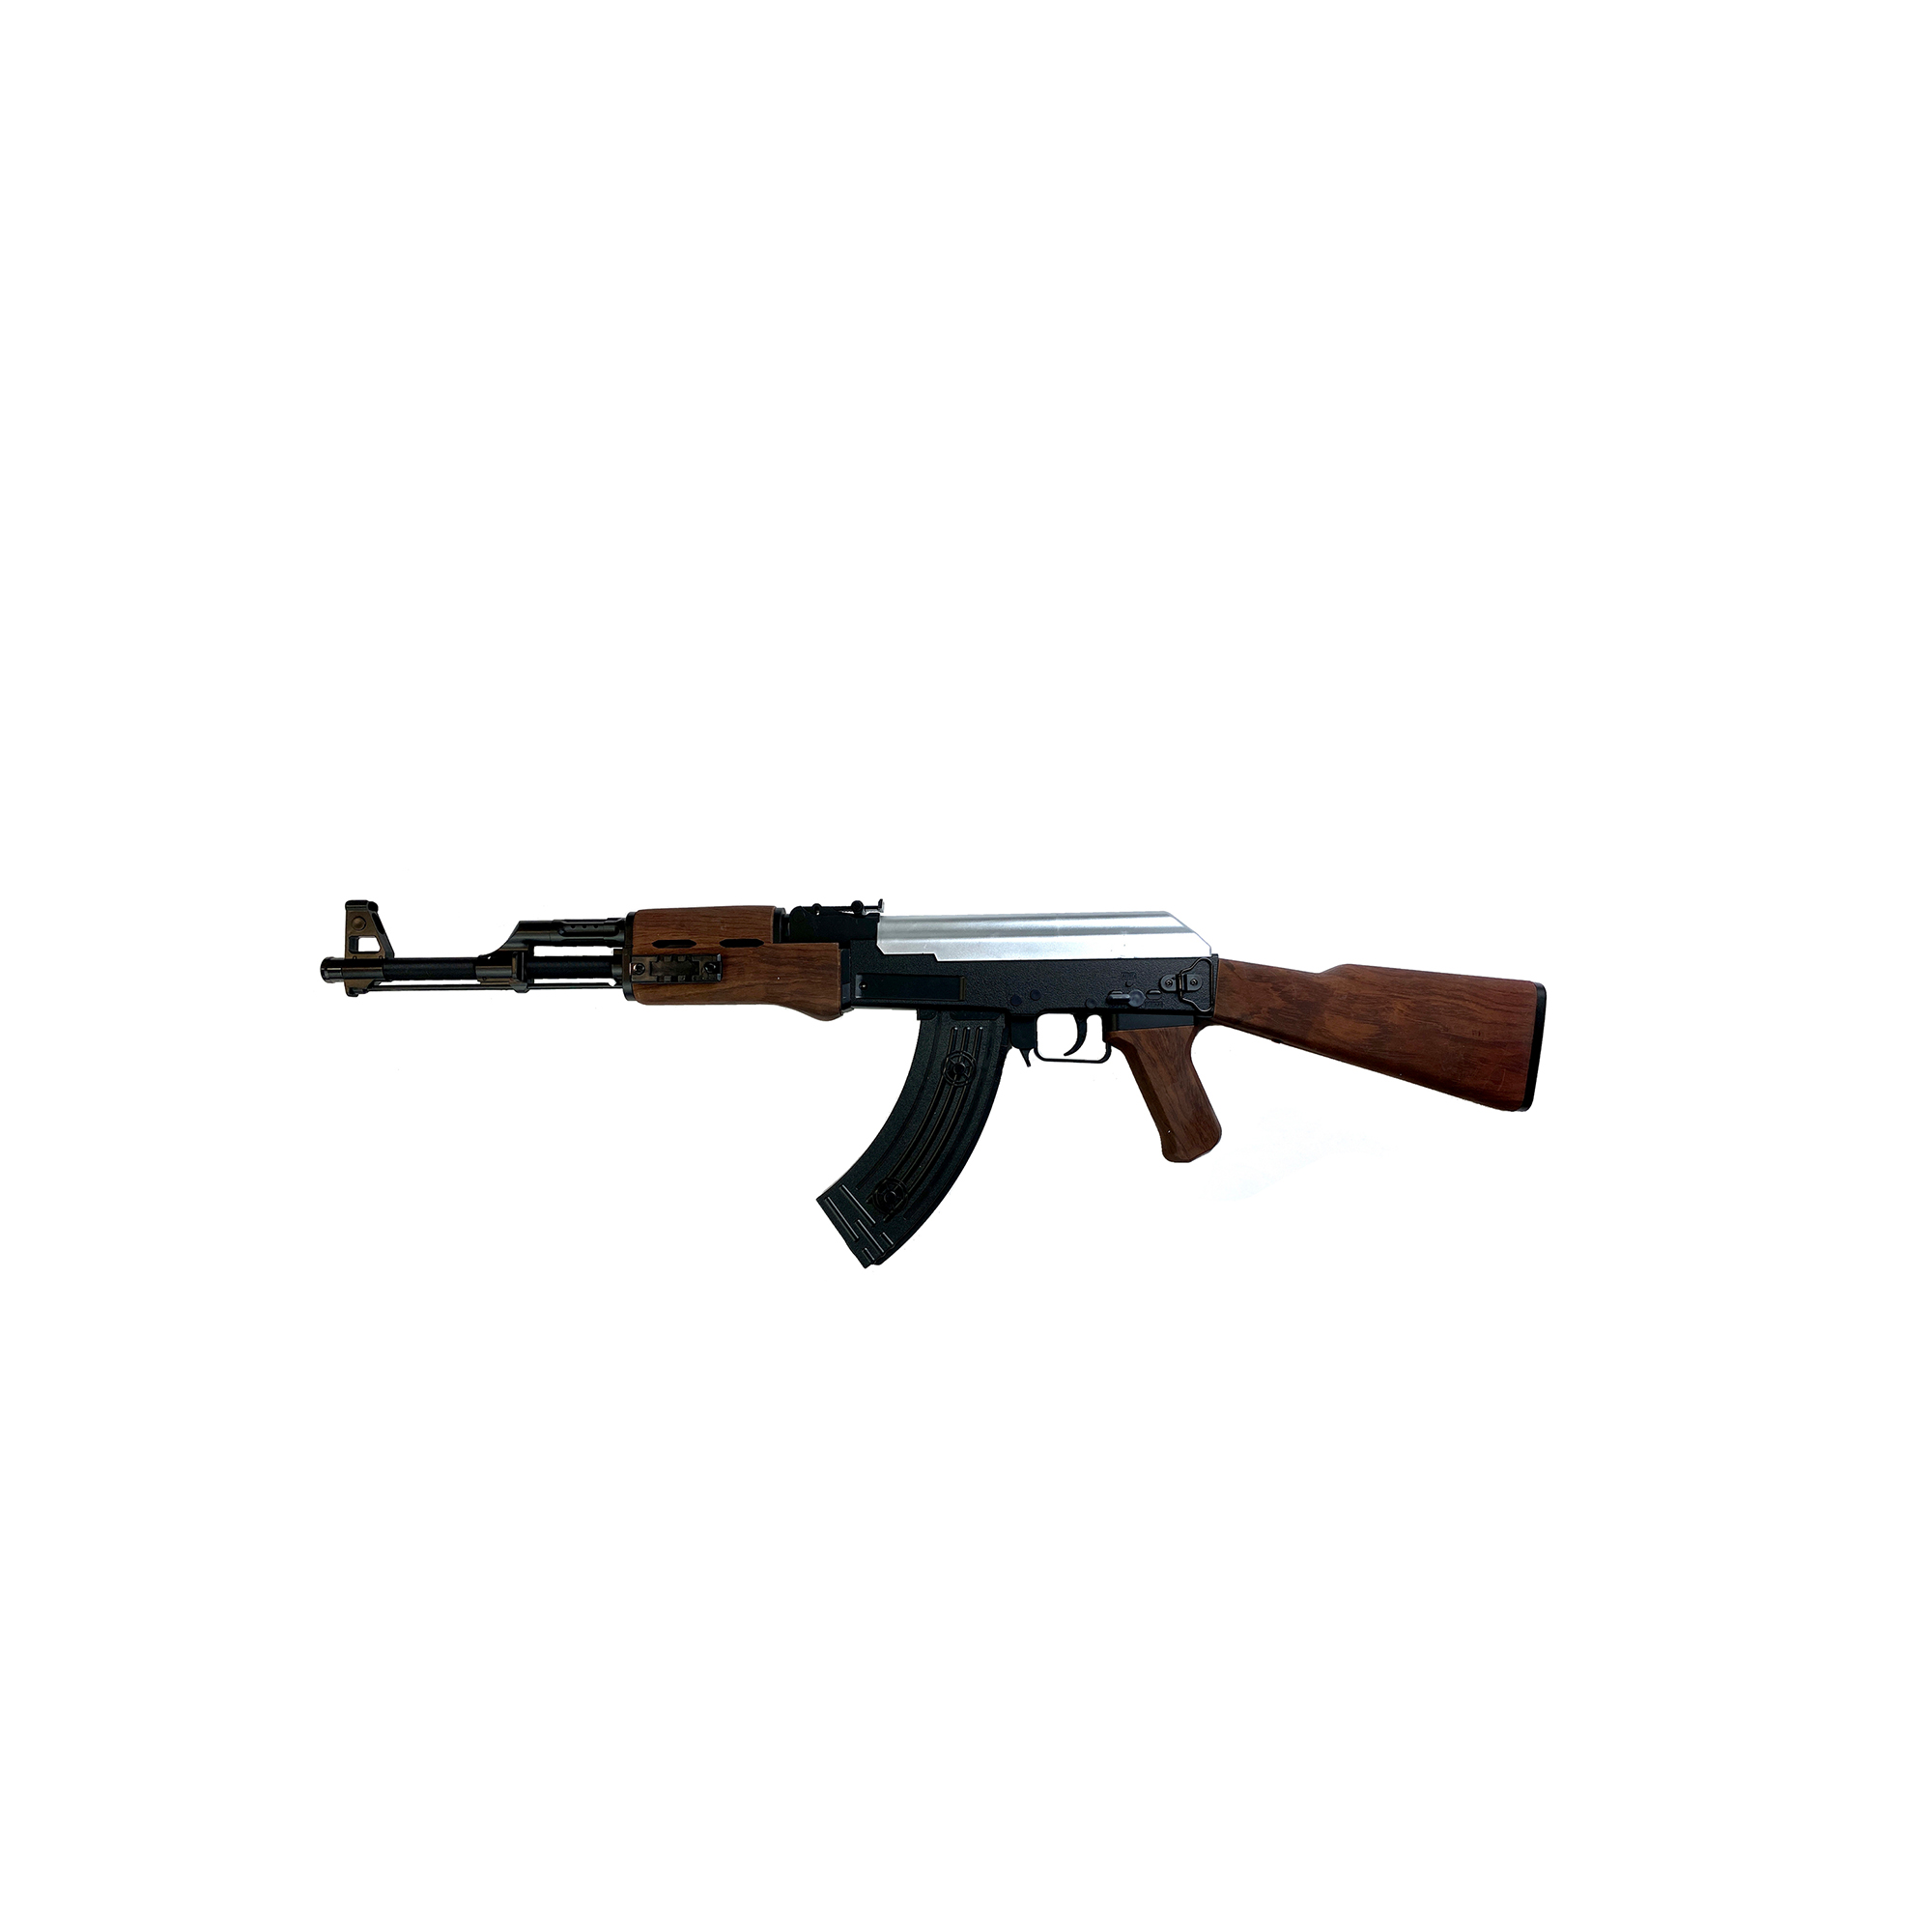 Orbiball assault rifle with silver receiver 321OB-4-4 AK-47